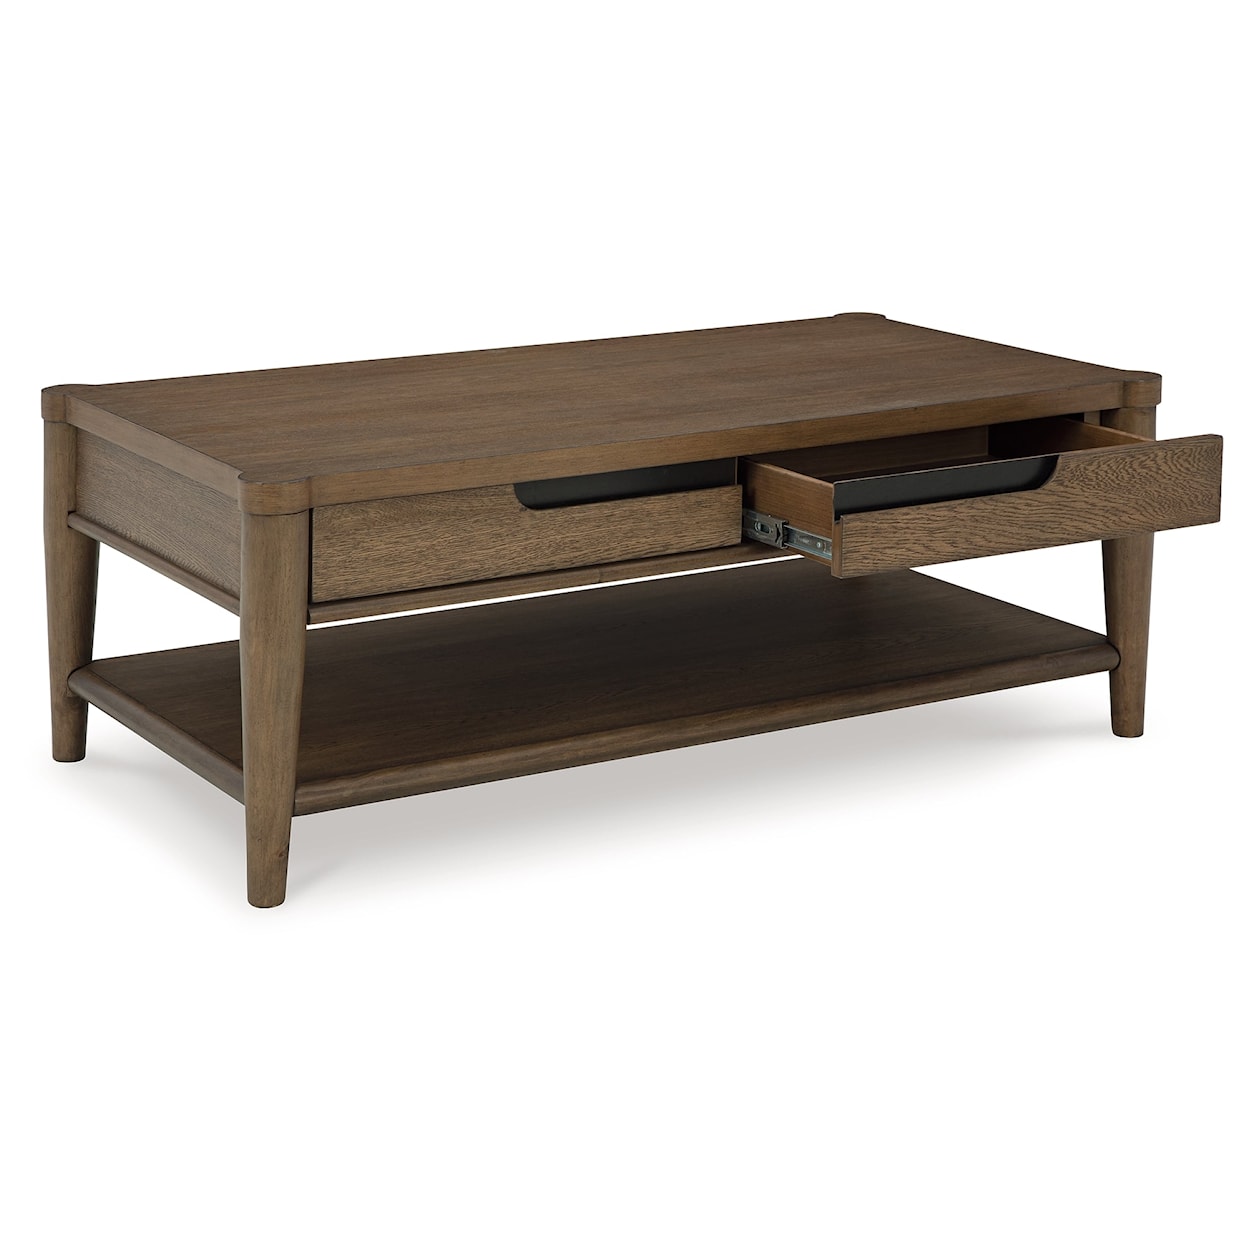 Michael Alan Select Roanhowe Coffee Table and 2 End Tables